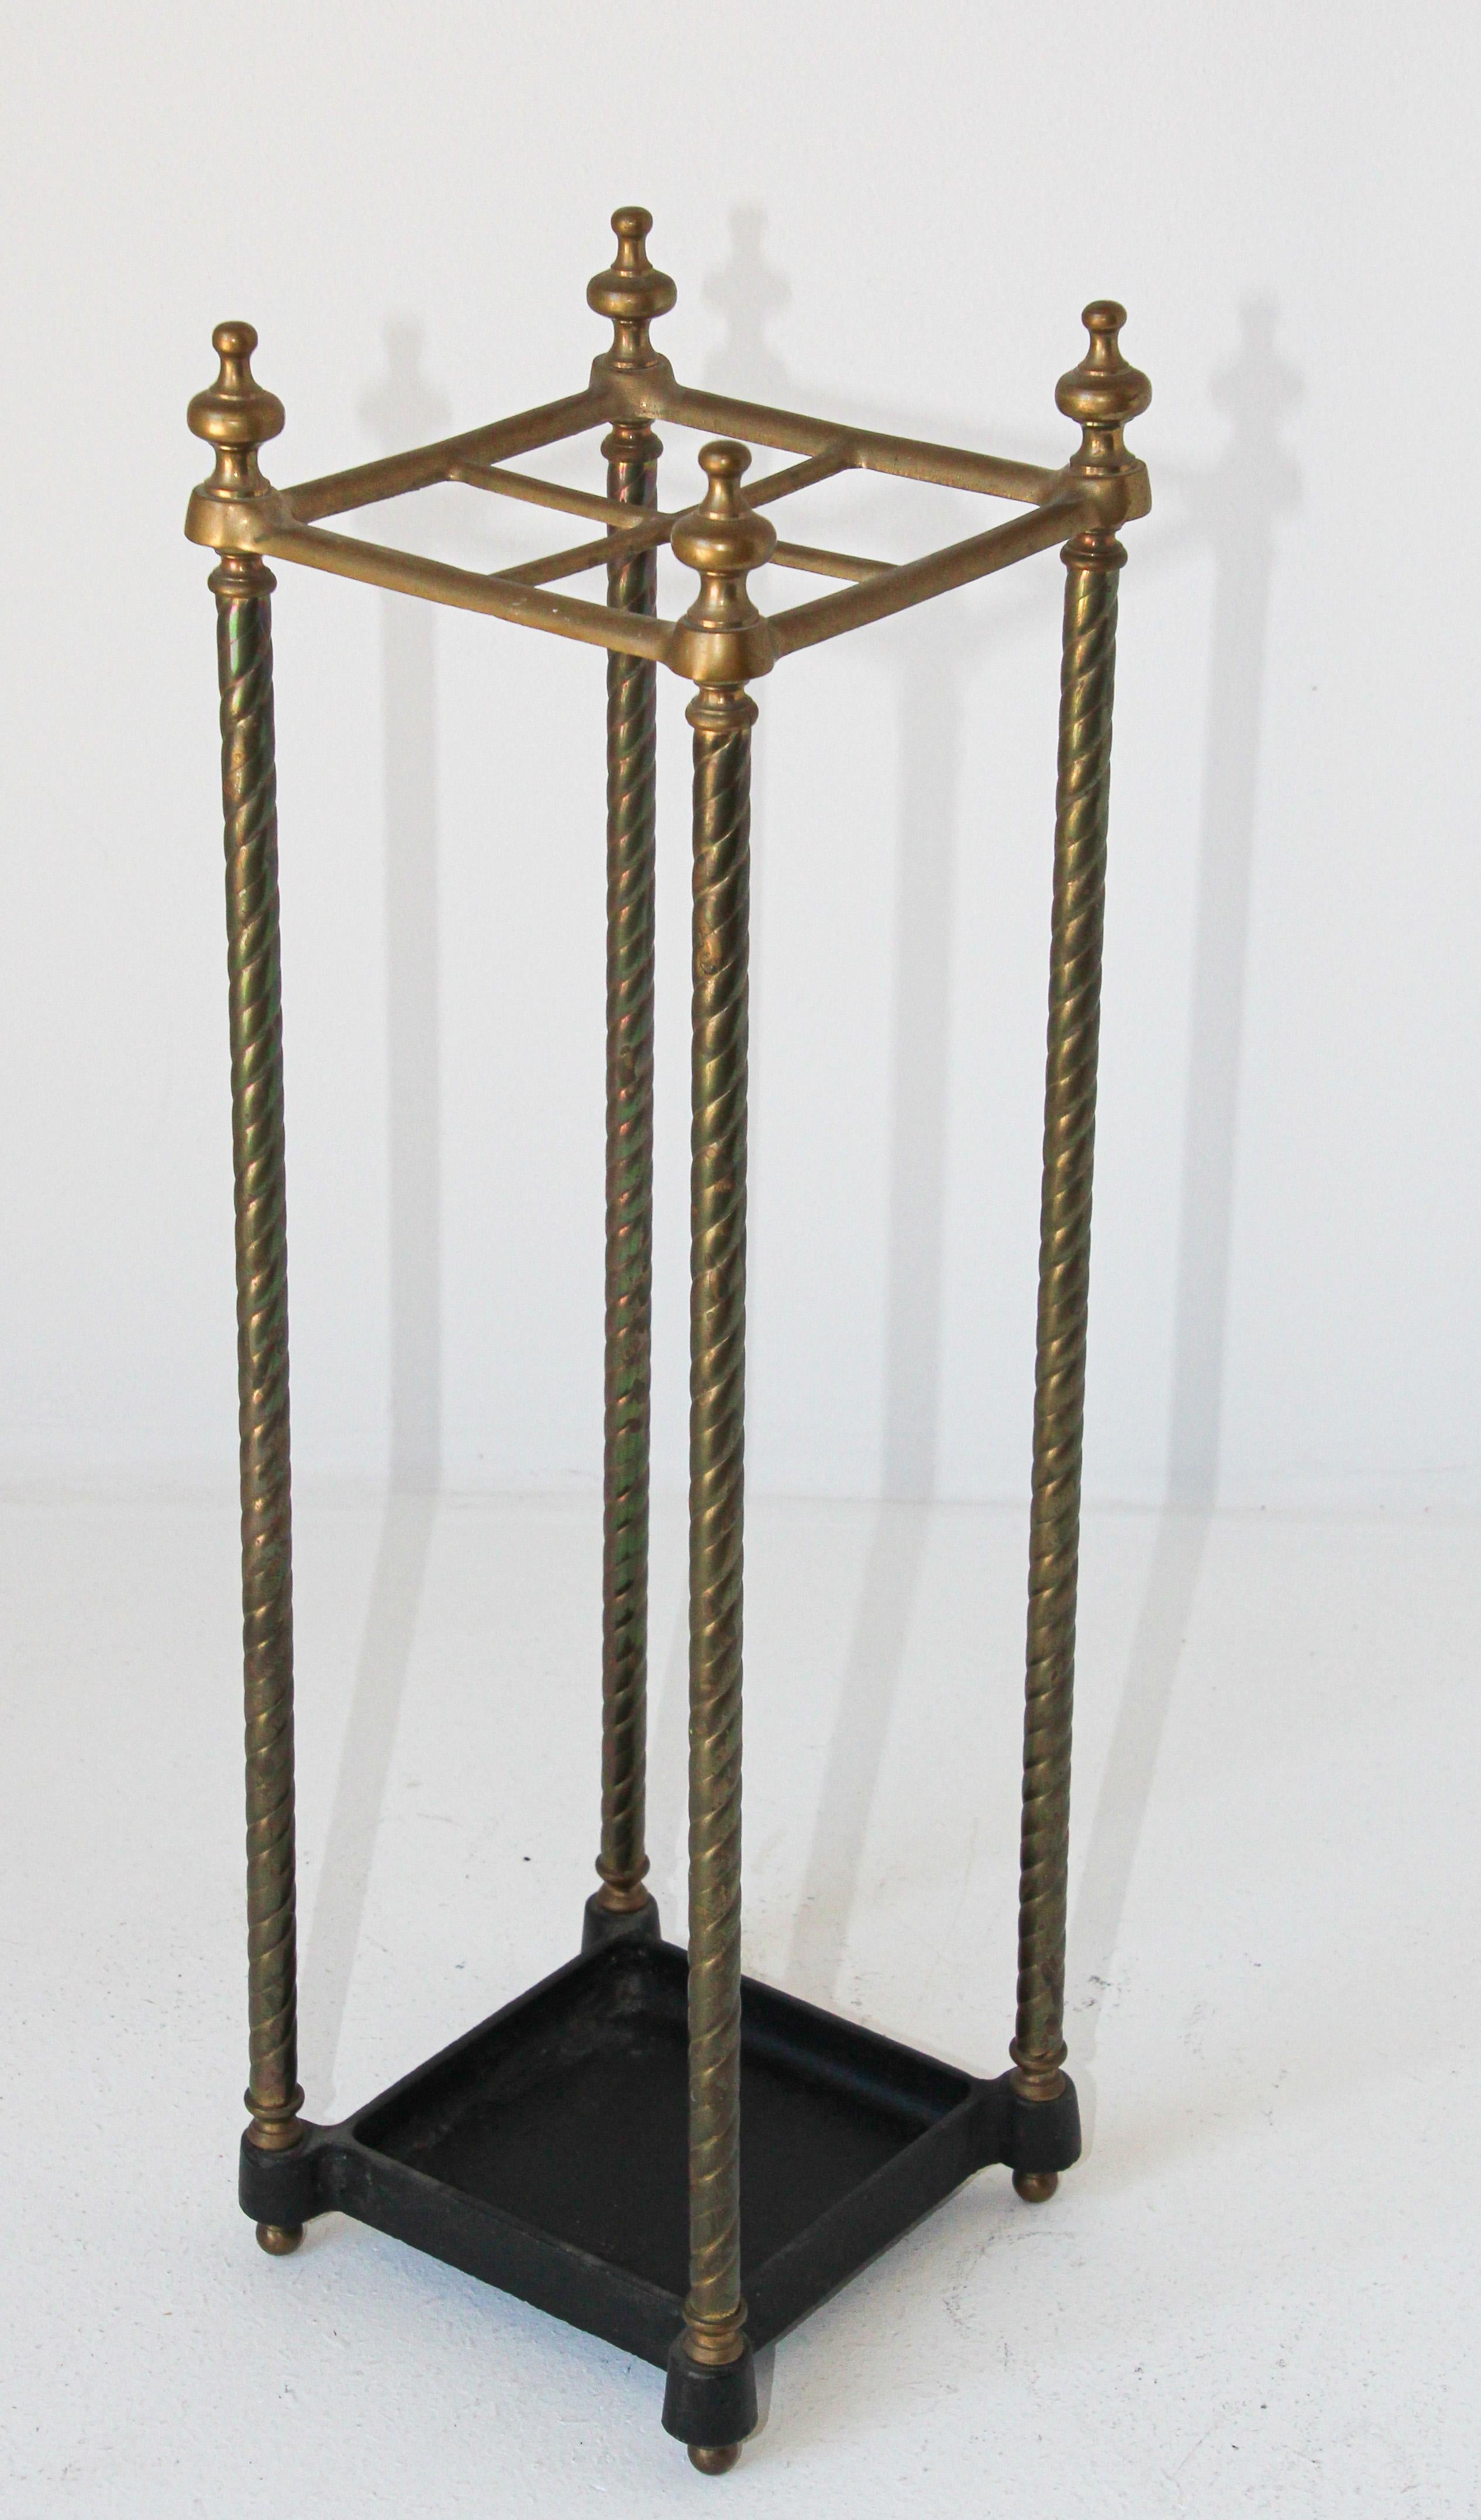 Victorian brass umbrella stand or stick stand.
Vintage polished brass top divided into four sections to hold either walking sticks or umbrellas.
Square umbrella brass valet rack with four sections and black iron tray and supported upon a tubular